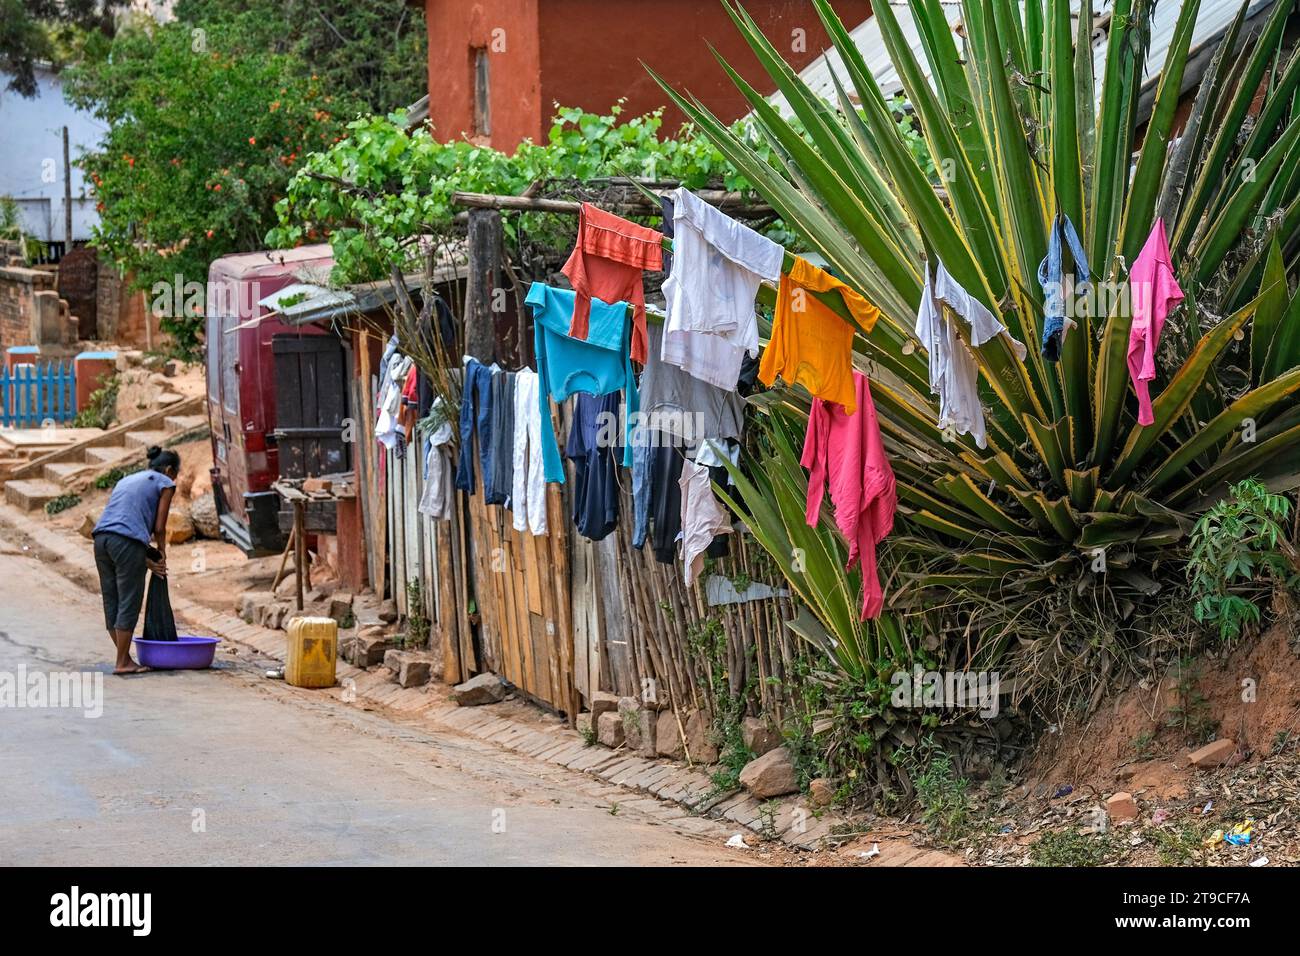 Malagasy woman washing clothes in street and laundry hanging from succulent leaves in village Ambohimanga Rova near Antananarivo, Madagascar, Africa Stock Photo